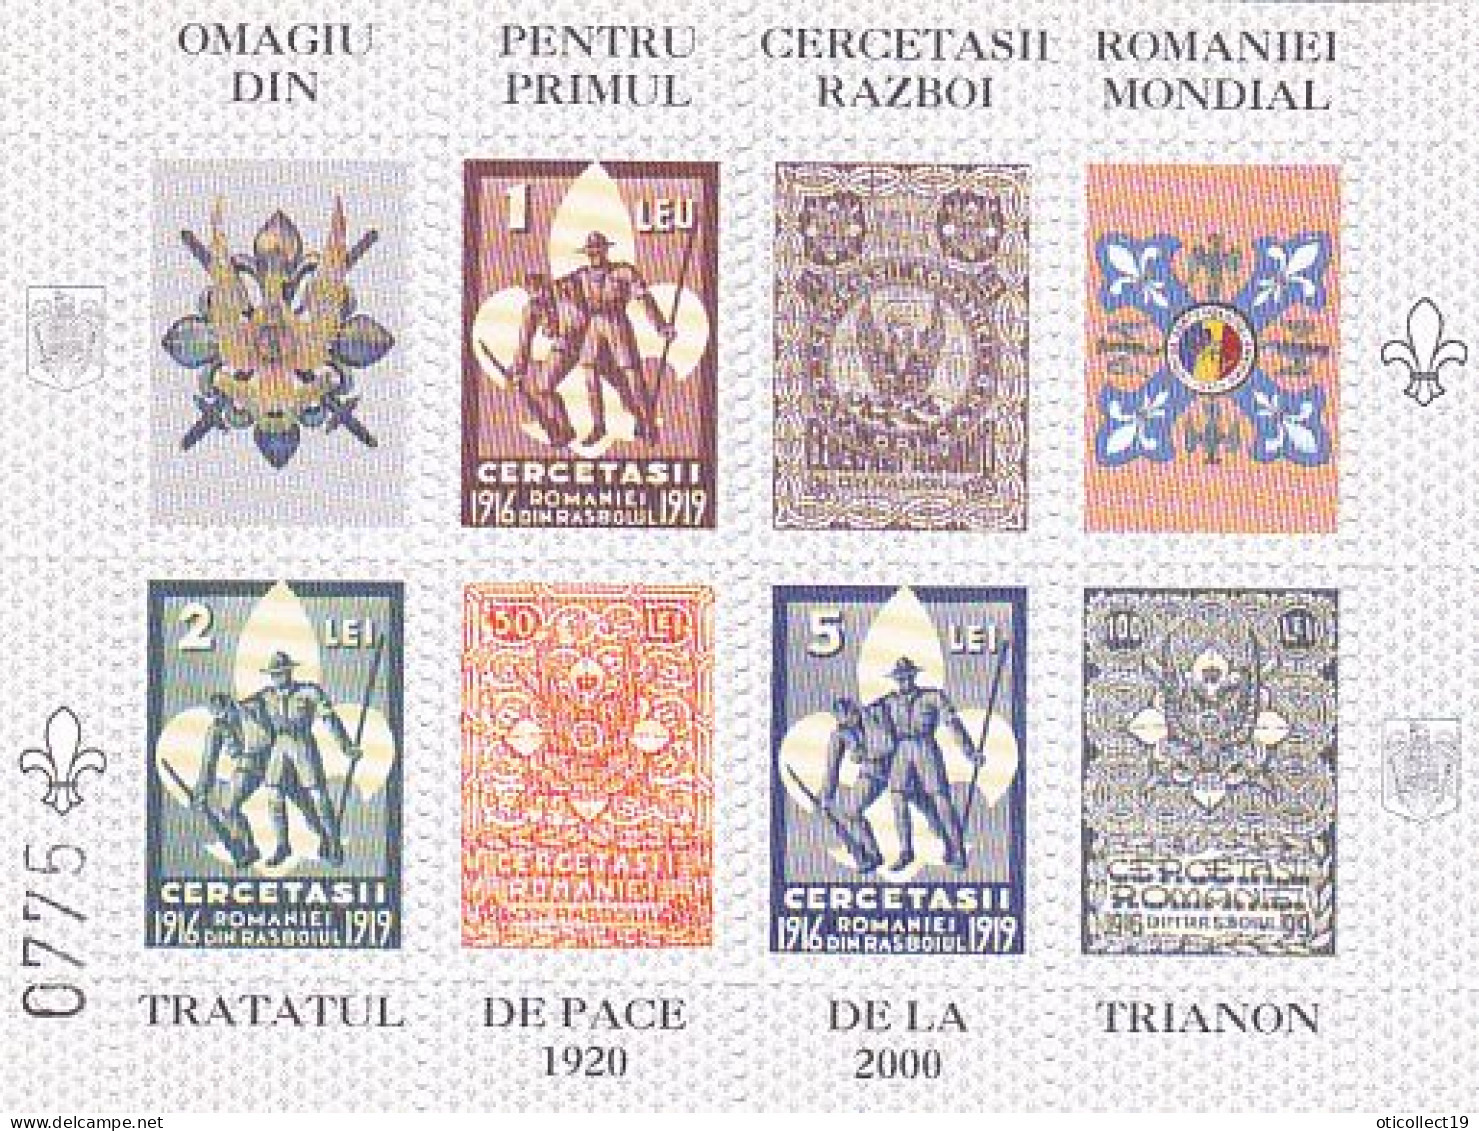 FULL SHEETS, SCOUTS, SCOUTISME, ROMANIAN SCOUTS IN WW1 MEMORIAL SHEET, 2000, ROMANIA - Full Sheets & Multiples